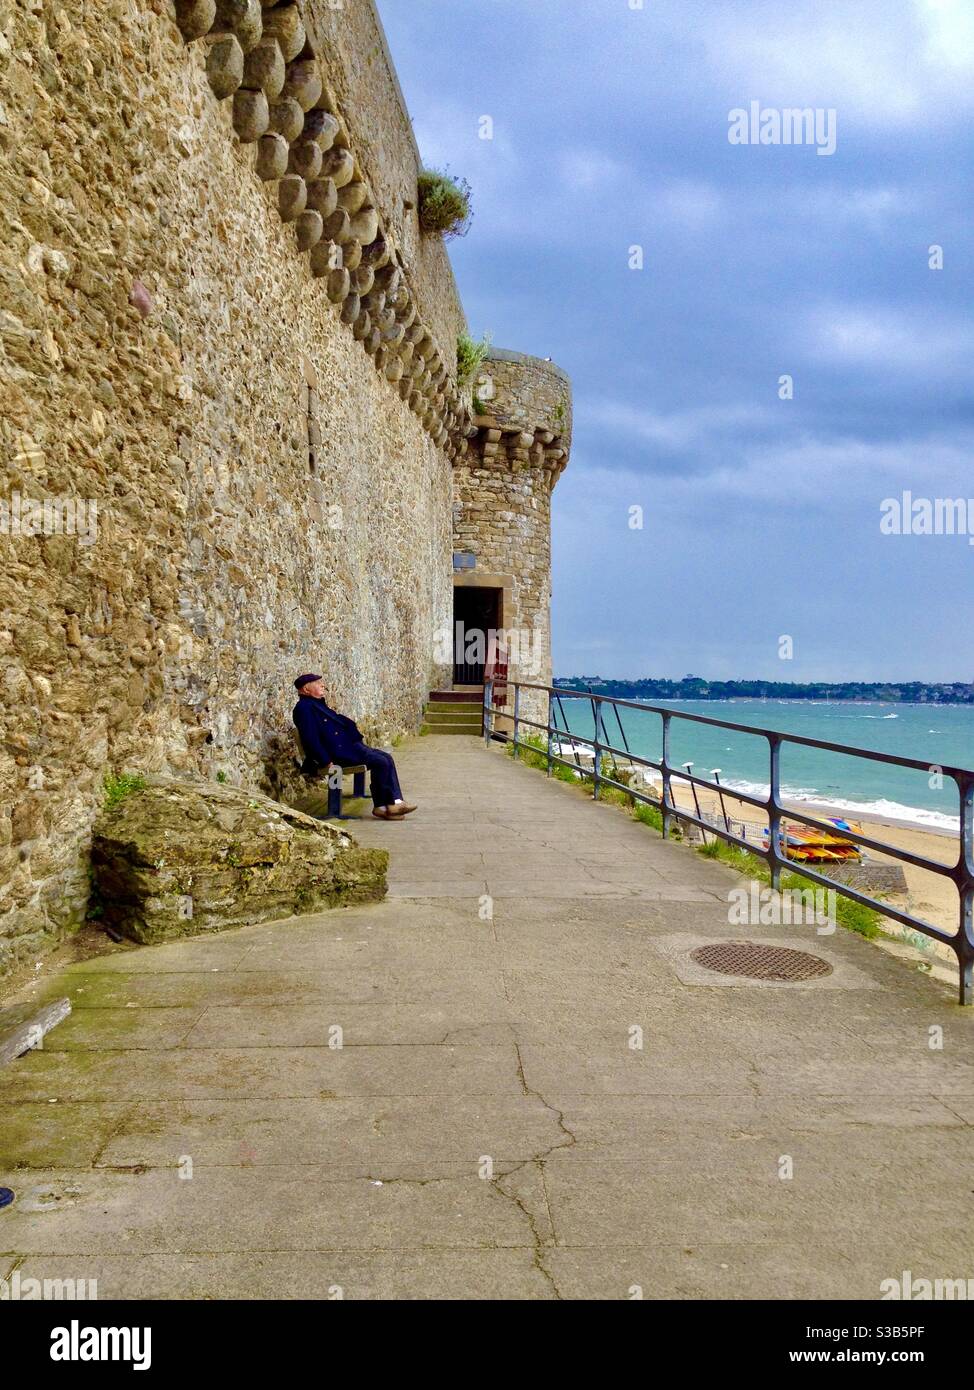 Older gentleman enjoying an ocean view by Fort National, formerly named Fort Royal, in Saint-Malo, Brittany, France. Stock Photo